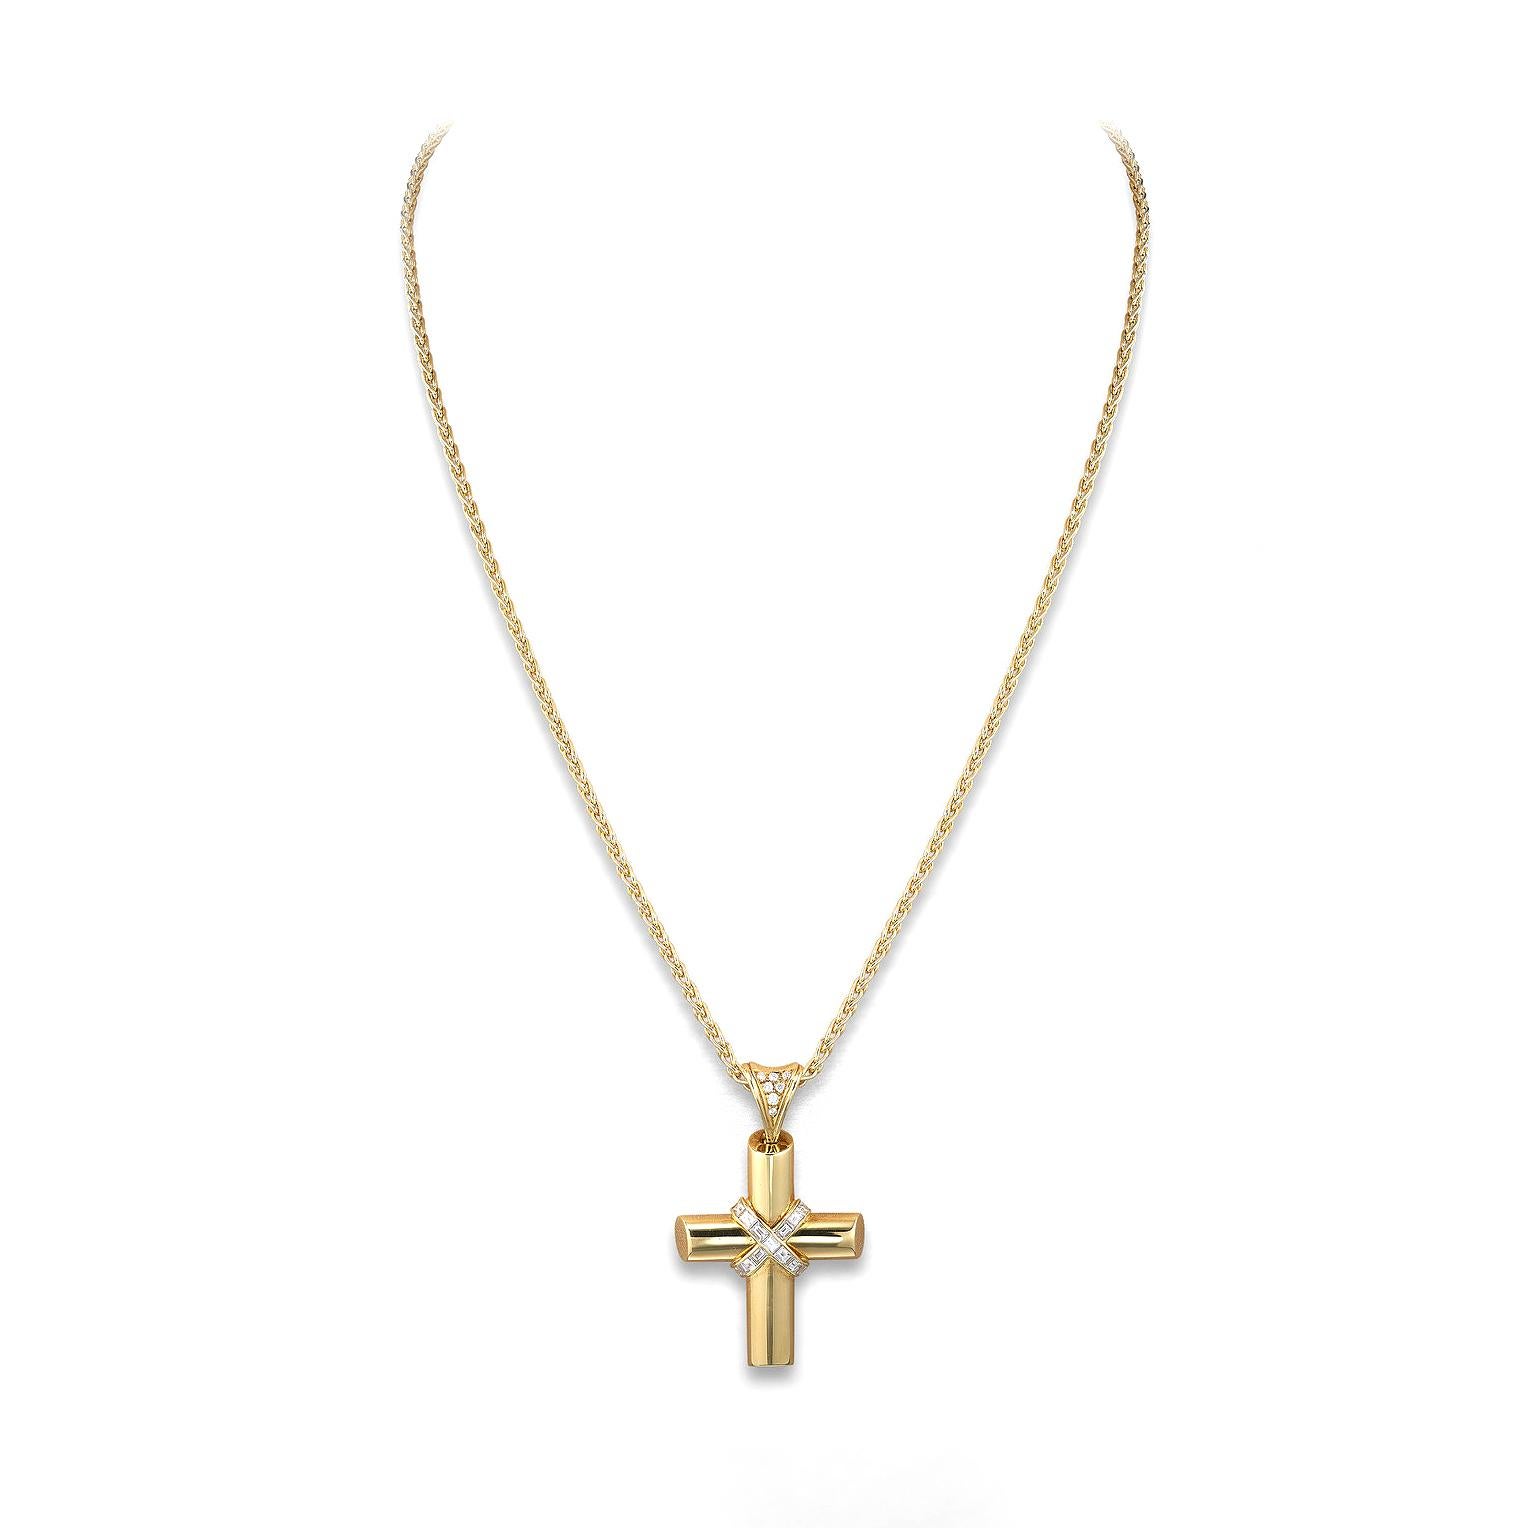 Cross pendant in 18kt yellow gold set with 13 baguette cut diamonds 1.70 cts and 7 diamonds 0.13 cts